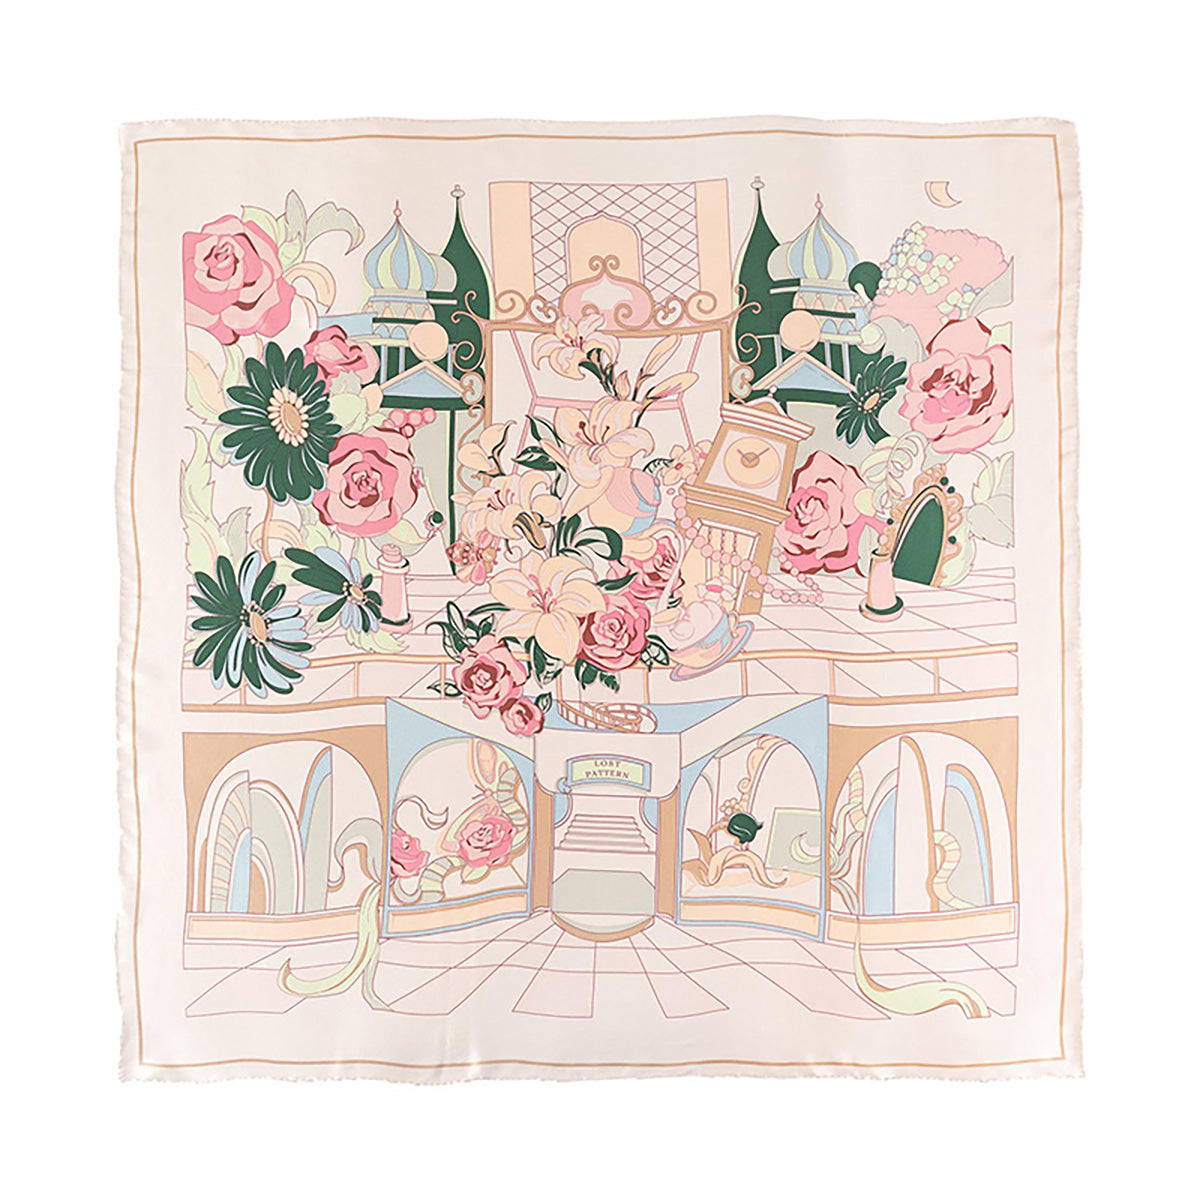 "Vintage Blooms" Large Silk Square Scarf - Champagne - Champagne - LOST PATTERN